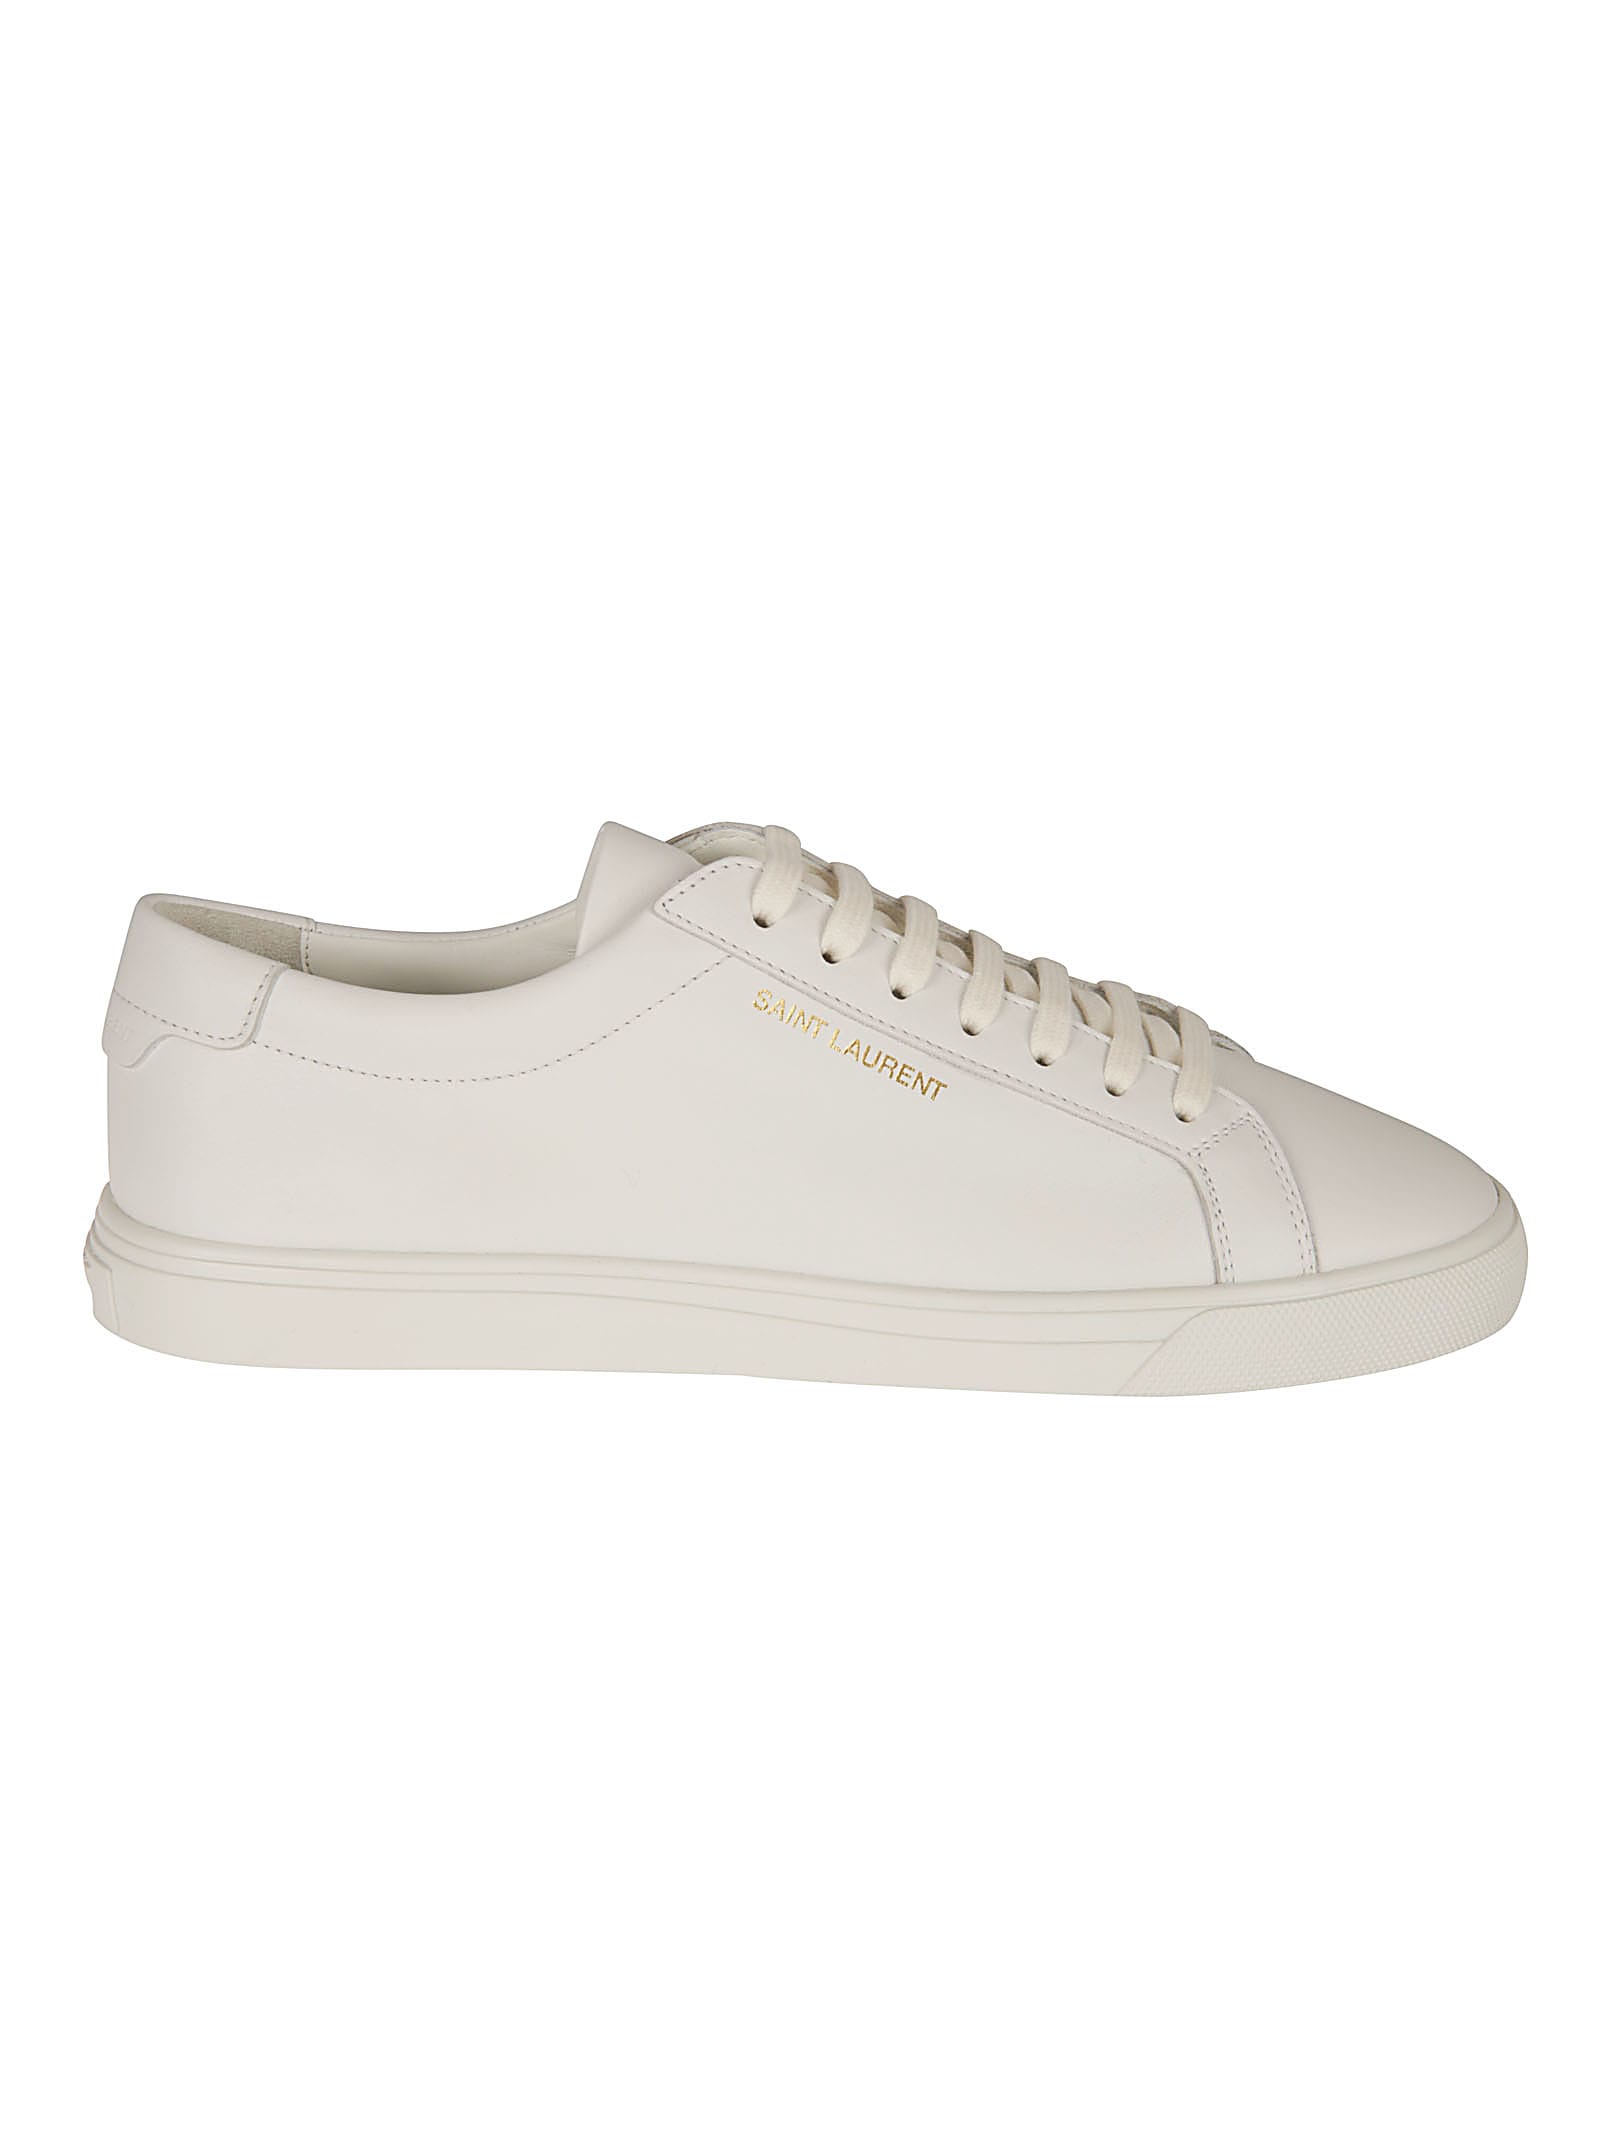 Saint Laurent Andy Low Top Sneakers In White